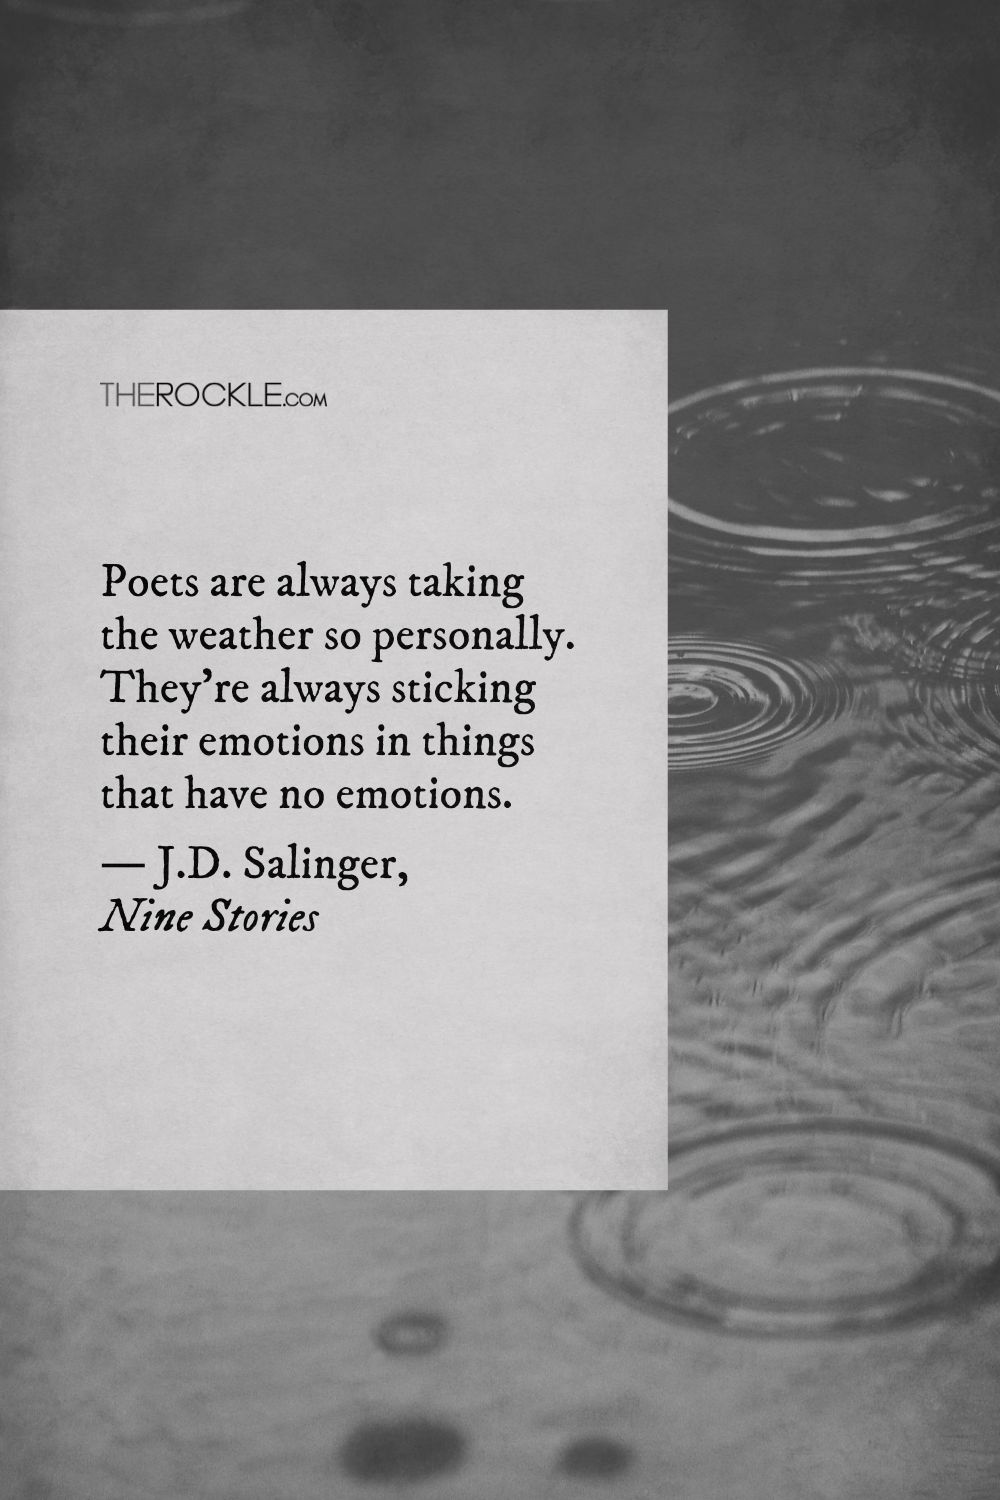 Salinger's quote about poets